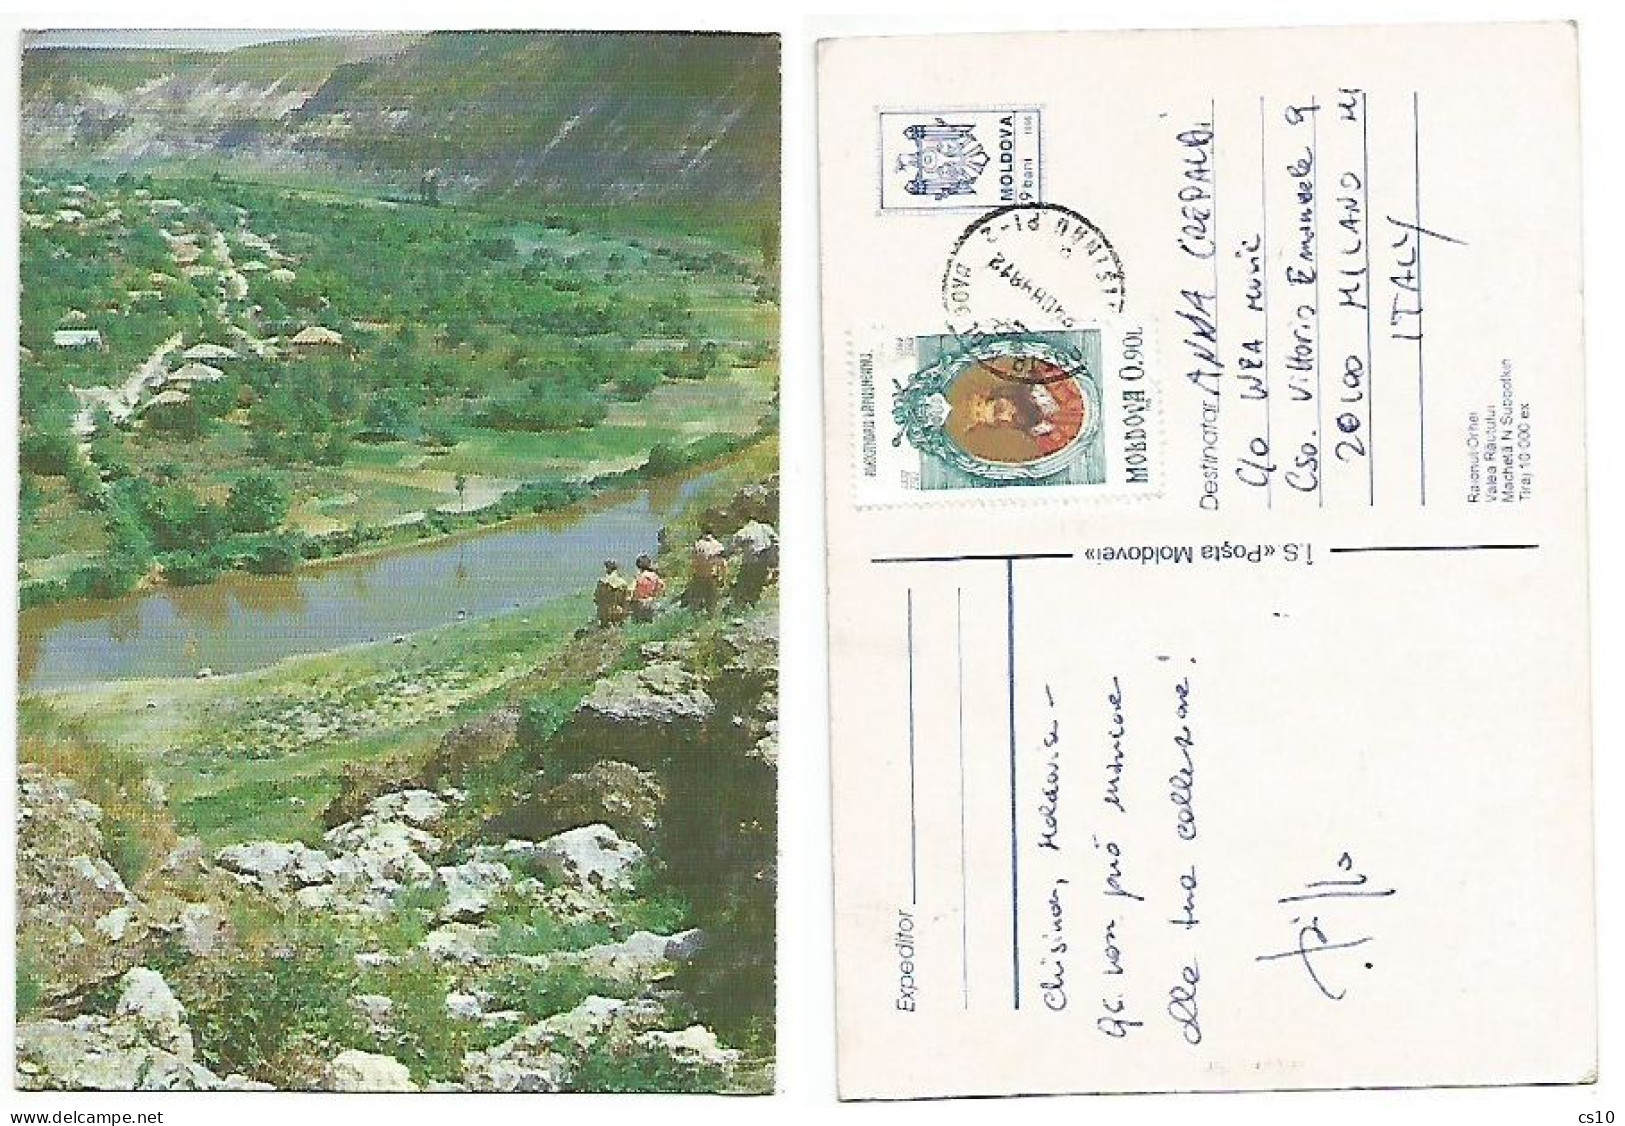 Moldova 1996 PSC Stationery Reut River Valley 9bani Used Chisinau 24aug1998 To Italy With Lupusneanu L0.90 - Moldova